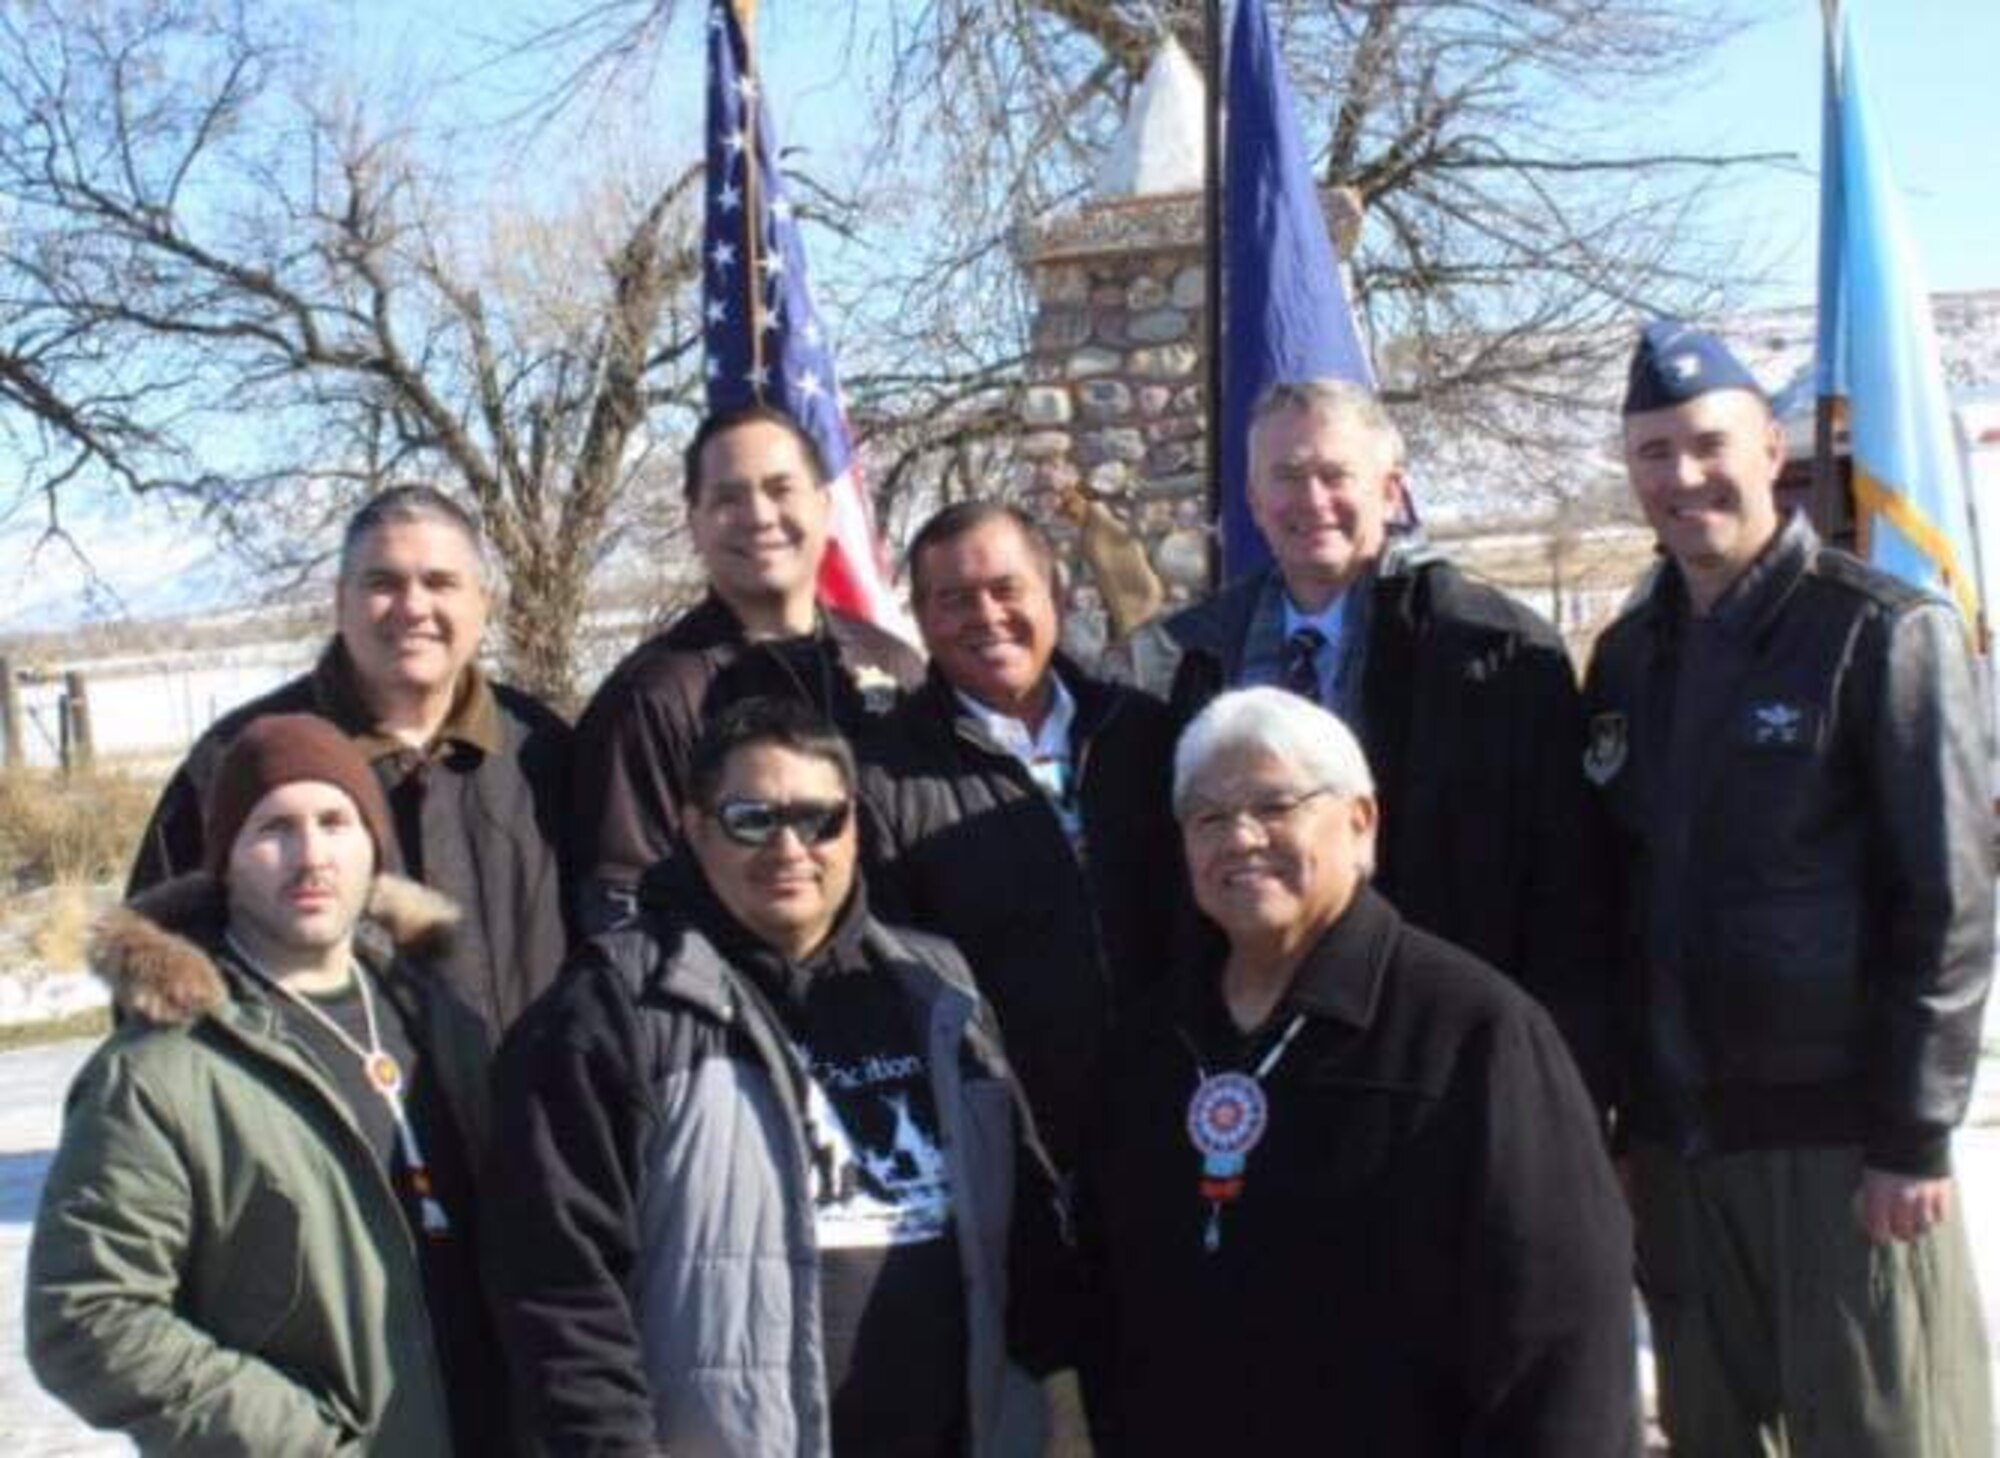 Col. Aaron Blum, 75th Air Base Wing, represents Hill Air Force Base at the memorial ceremony hosted by the Northwestern Band of the Shoshone Jan. 29 for the Bear River Massacre. The annual memorial was held northeast of Preston, Idaho at the site along the Bear River where more than 300 members of the Northwest Shoshone Tribe were killed in their winter camp on Jan. 29, 1863. The Bear River Massacre was the single greatest loss of Indian lives in American history. Idaho Governor Brad Little attended the memorial and made an official proclamation recognizing Jan. 29, 2019, as a day of remembrance to the Bear River Massacre. Pictured are, left to right, back row: Jeff Parry (Northwestern Band of the Shoshone), Utah Attorney General Sean Reyes, Darren Parry (Northwestern Band of the Shoshone Tribal Chairman), Idaho Governor Brad Little and Blum. Front row, left to right: Northwestern Band of the Shoshone Tribal Councilmen Michael Gross, Cale Worley and Dennis Alex. (Courtesy photo by Melody Parry, Northwestern Band of the Shoshone)